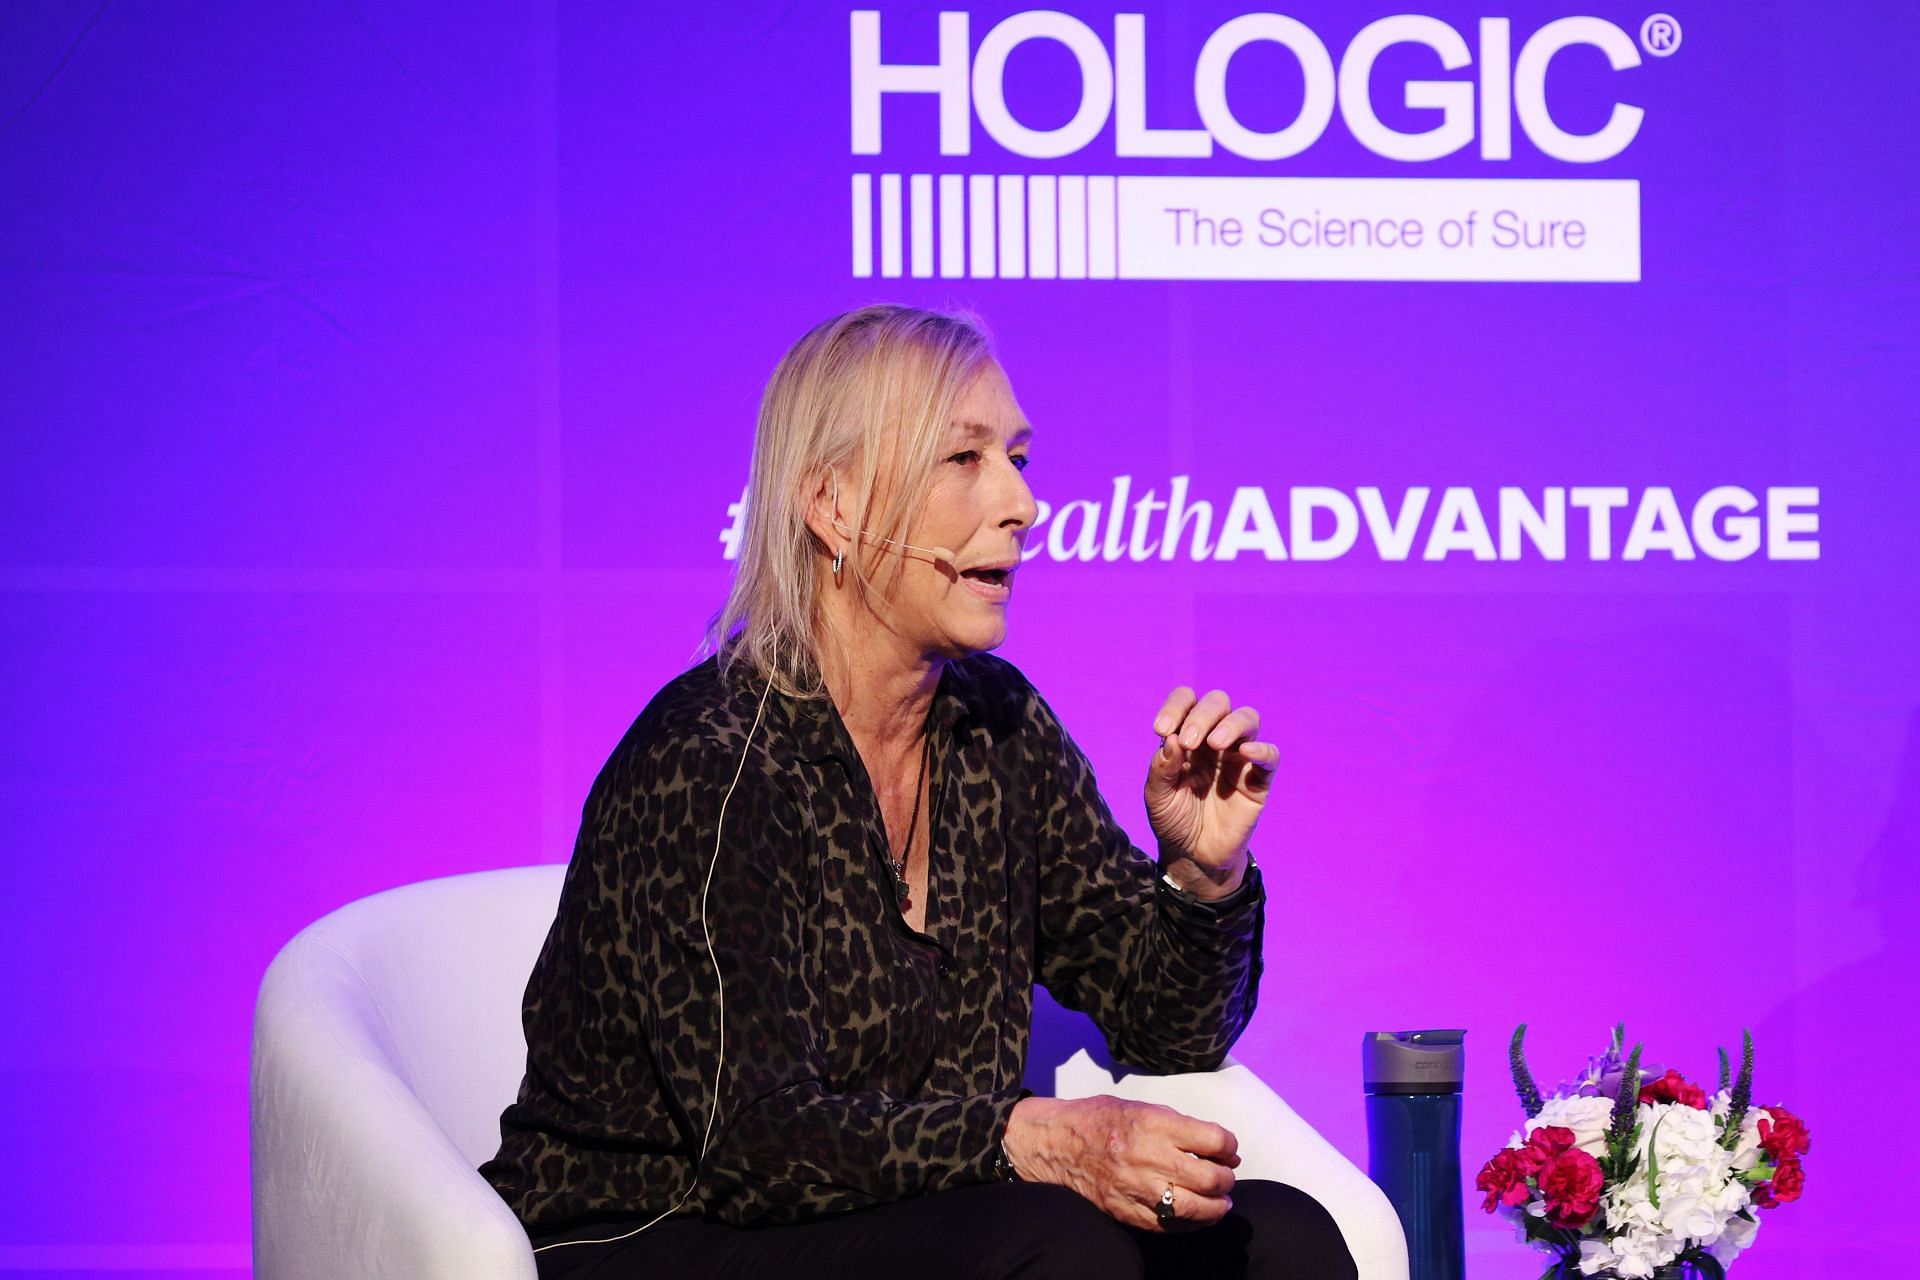 Martina Navratilova opned up on her initial reaction to her latest cancer diagnosis